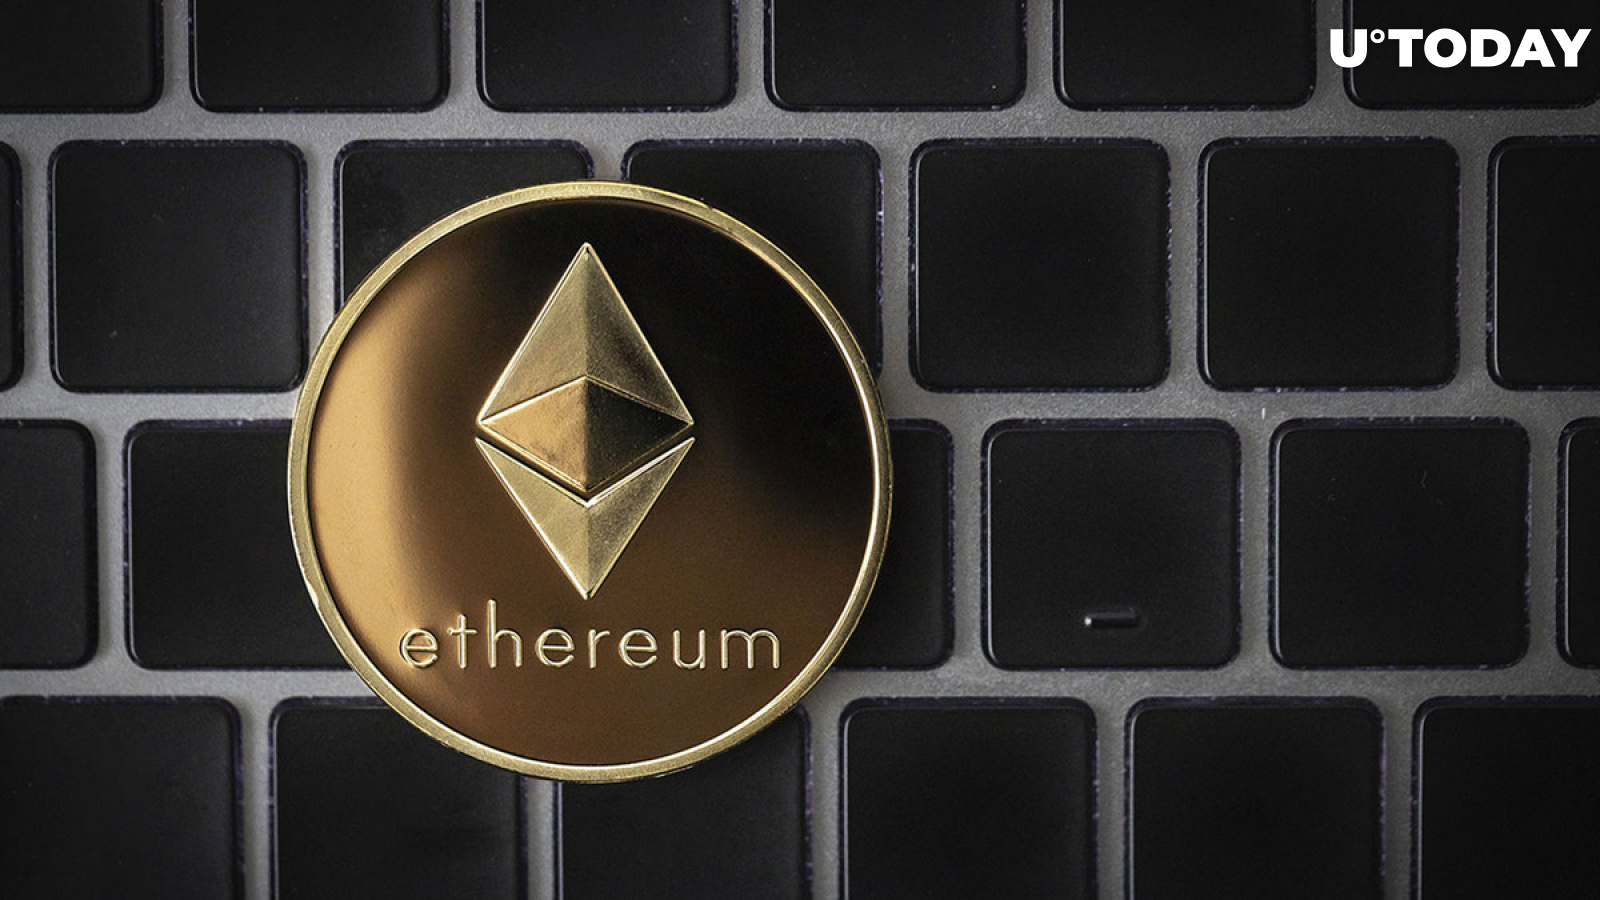 Ethereum Might See $100 Million in Daily ETH Withdrawals After Shapella, Data Suggests